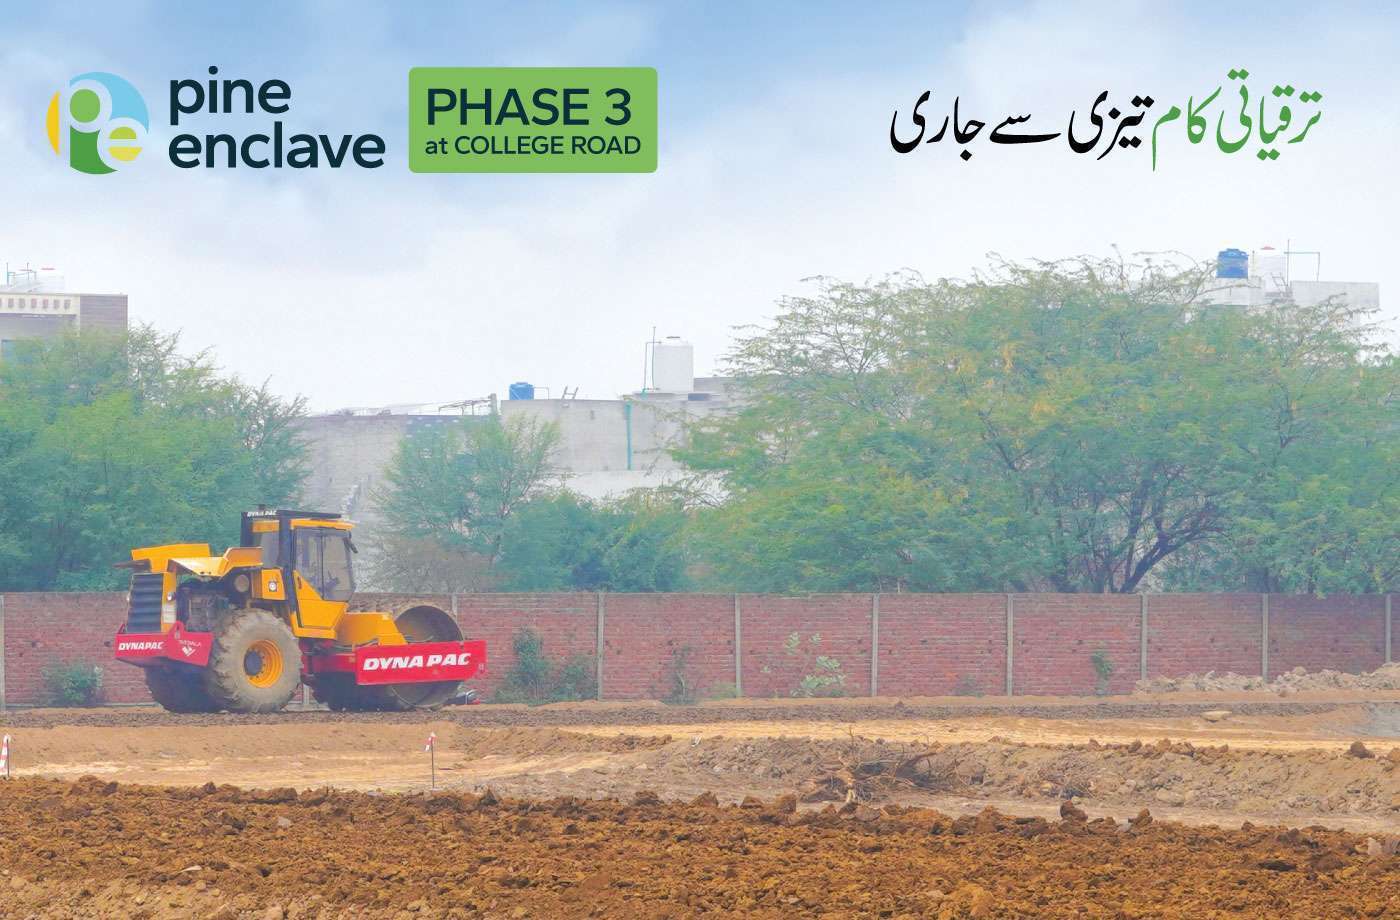 Pine Enclave Phase 3 at College Road